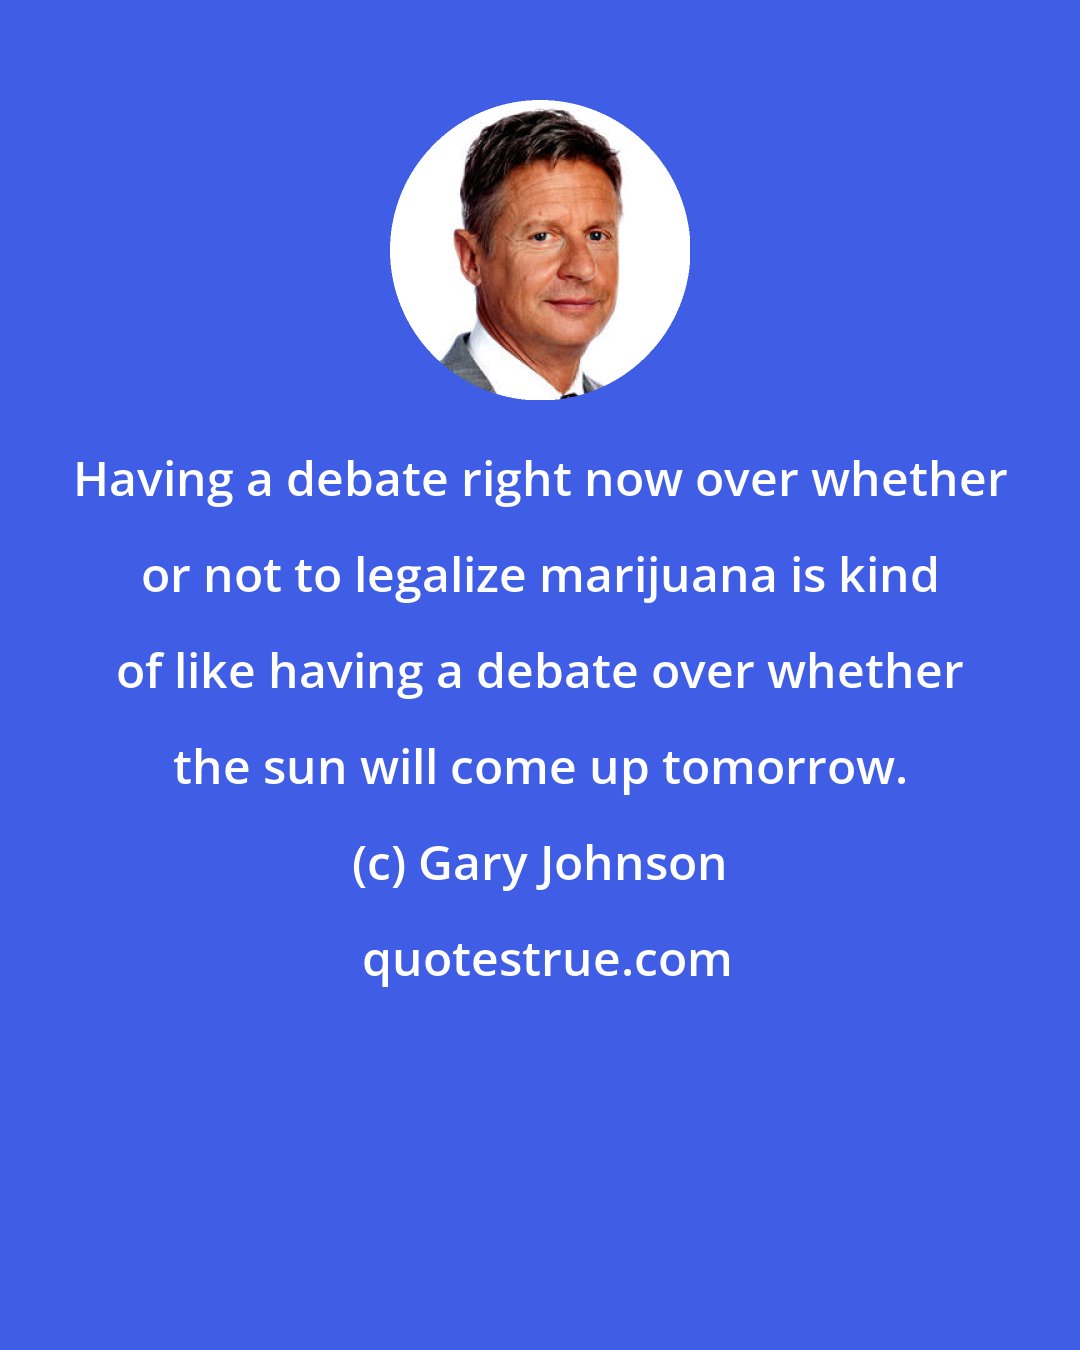 Gary Johnson: Having a debate right now over whether or not to legalize marijuana is kind of like having a debate over whether the sun will come up tomorrow.